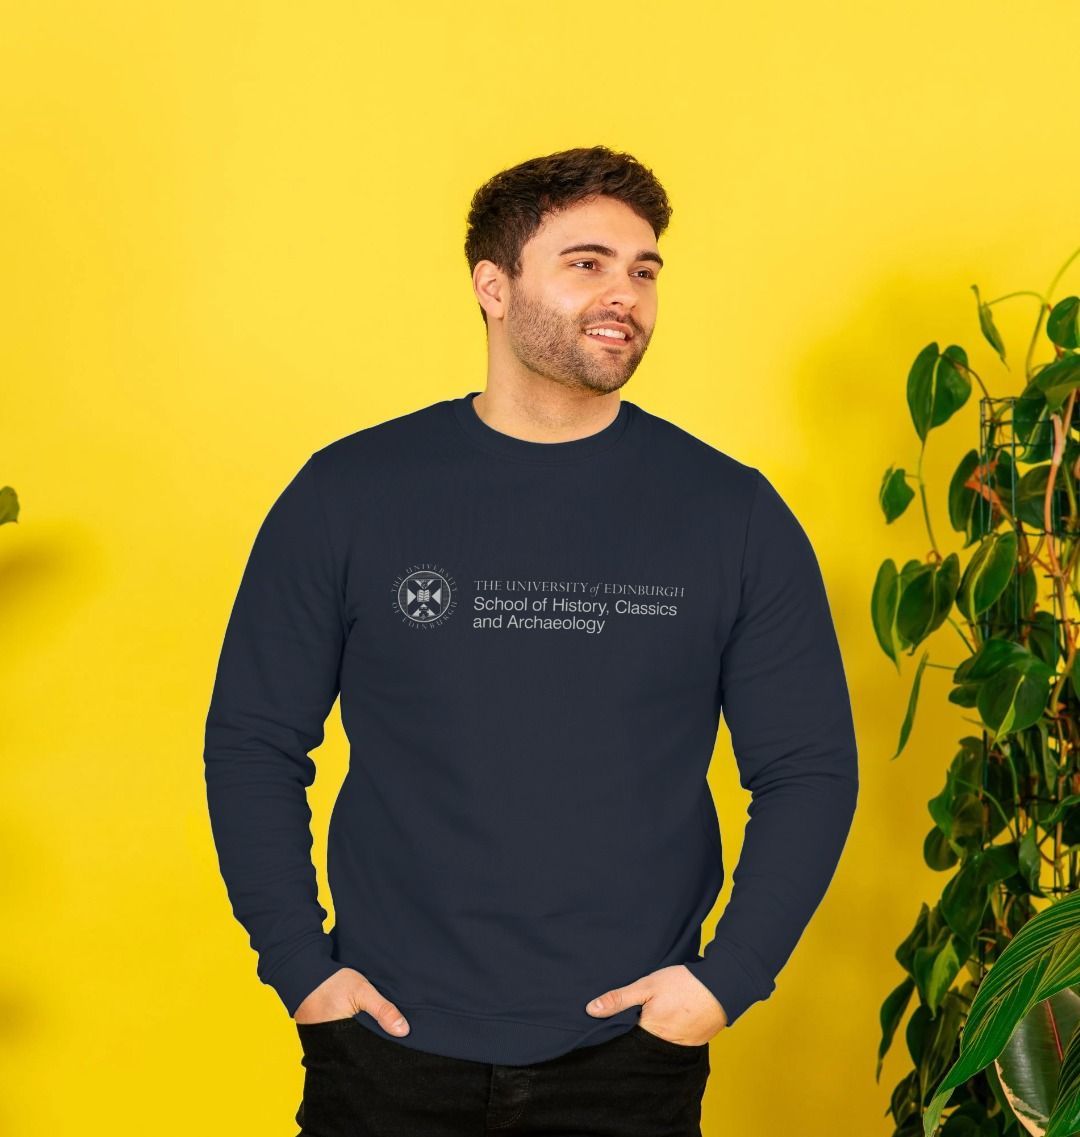 A model wearing our School of History, Classics and Archaeology Sweatshirt